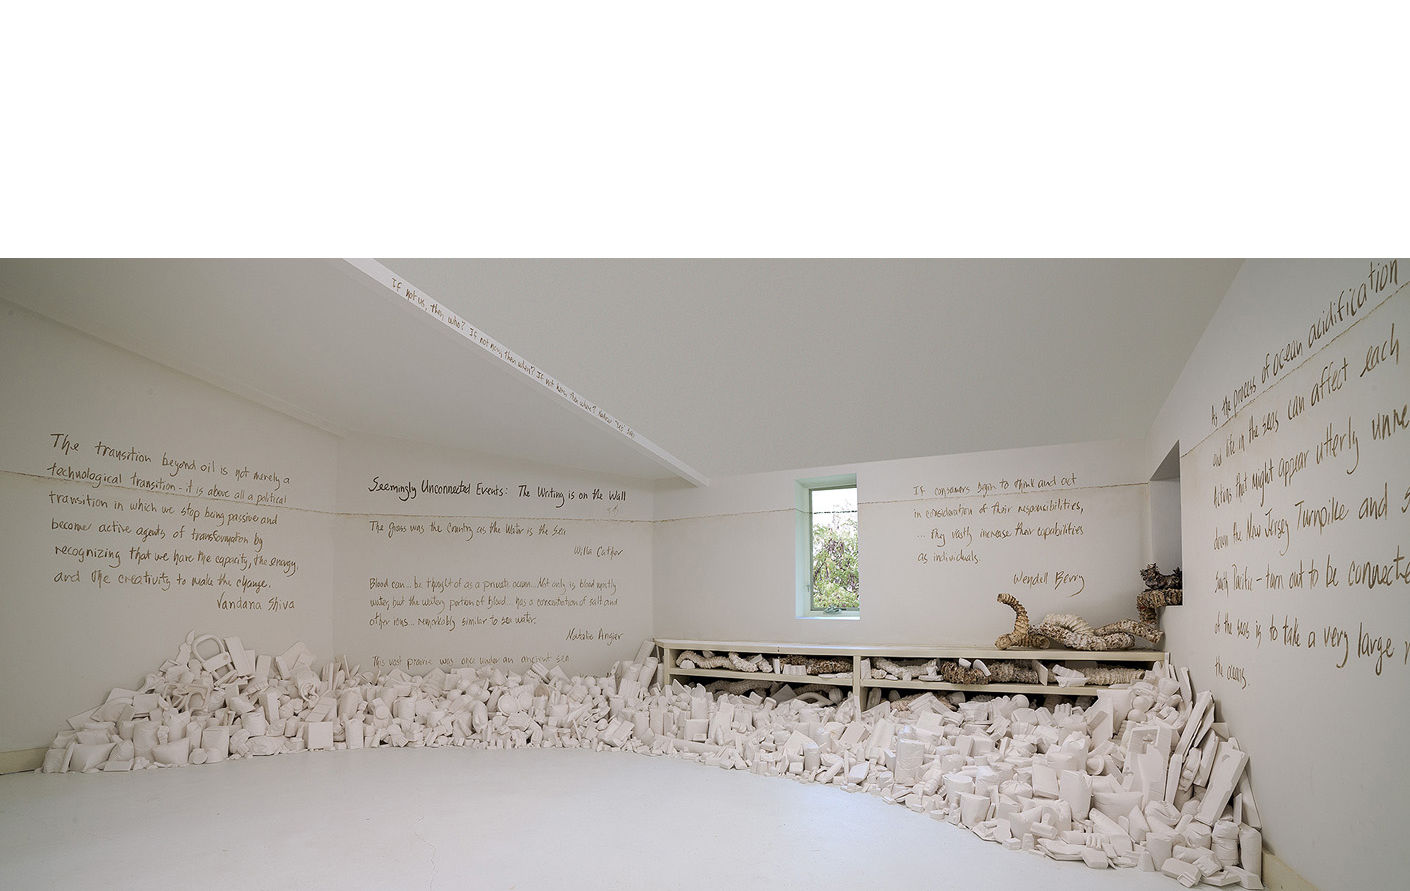  Installation overview, plaster organic forms and consumer goods casts, “waterline”, wall texts drawn in Kansas mud featuring writings of Natalie Angier, Willa Cather, Wendell Berry, Stan Cox and Paul Cox, Wes Jackson, Elizabeth Kolbert, Karen McCoy,